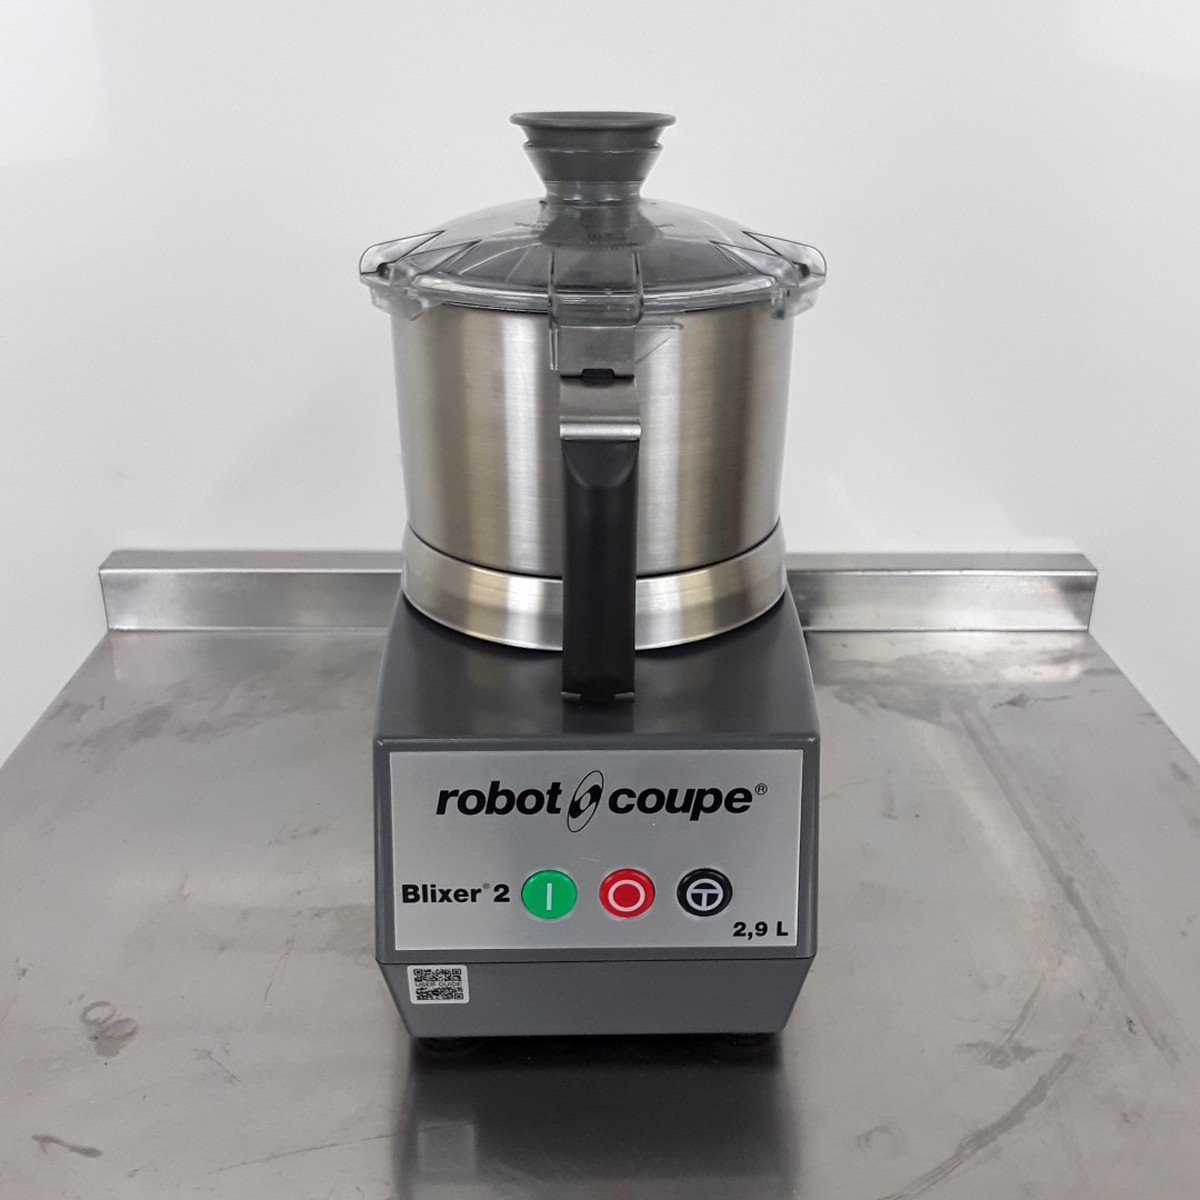 https://for-sale.used-secondhand.co.uk/media/used/secondhand/images/80627/used-robot-coupe-blixer-2-food-processor-bridgwater-somerset/1200/robot-coupe-blixer-2-food-processor-994.jpg